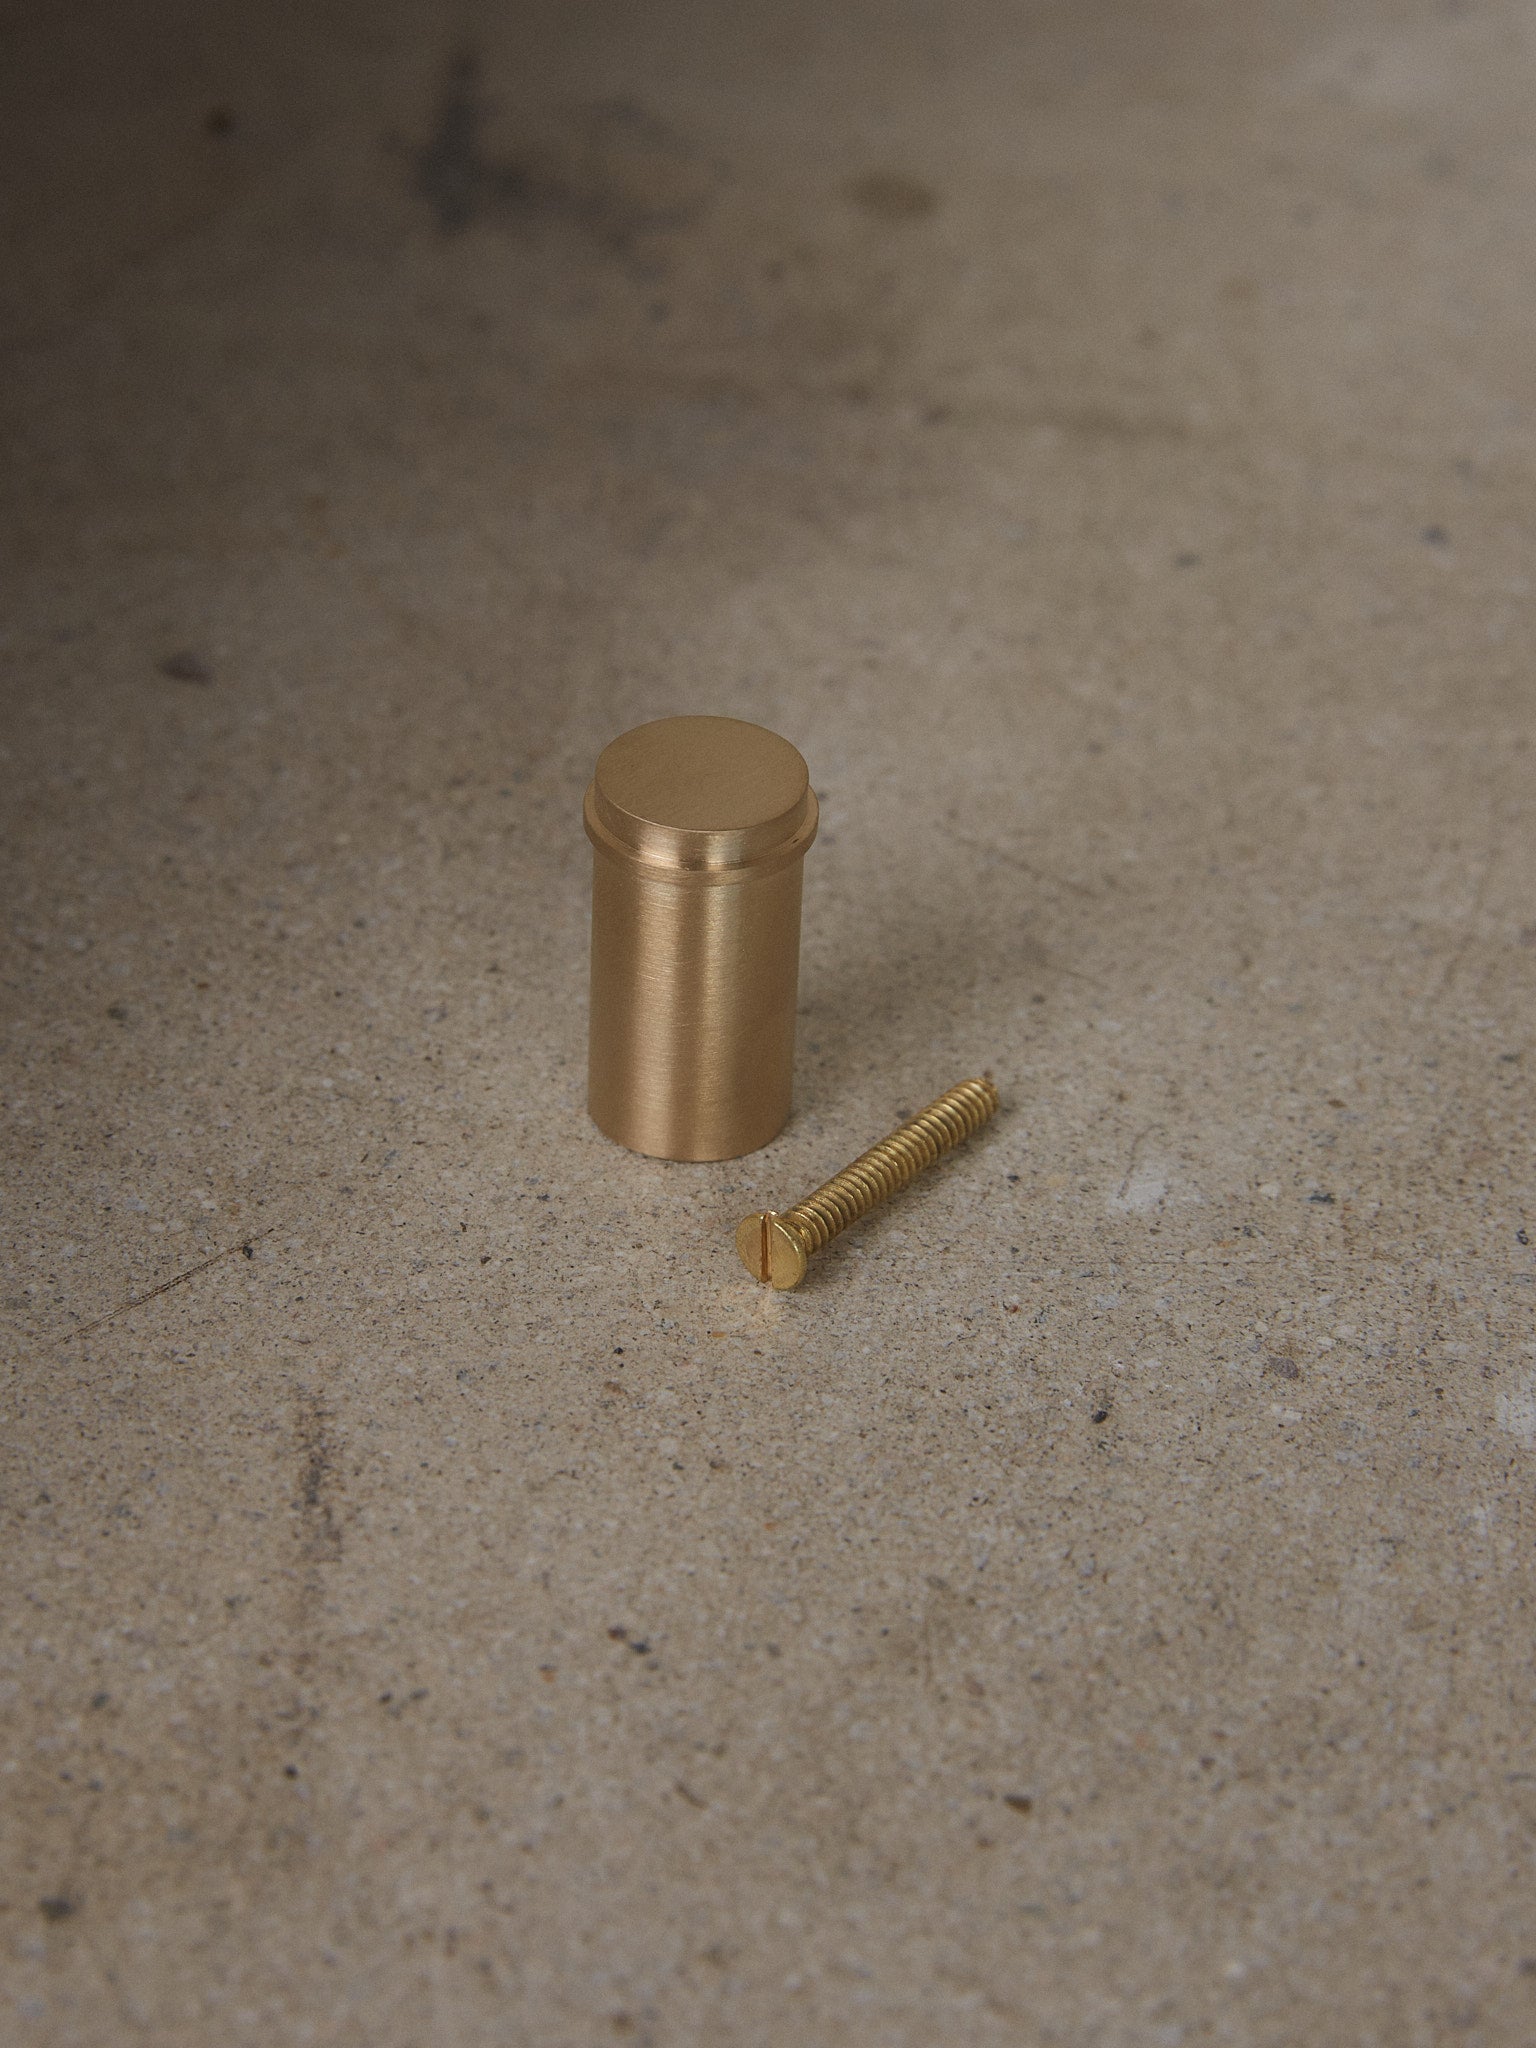 Small Brass Hook. Minimal and timeless round brass hook designed to adorn walls for hanging coats, bags or other necessities. 